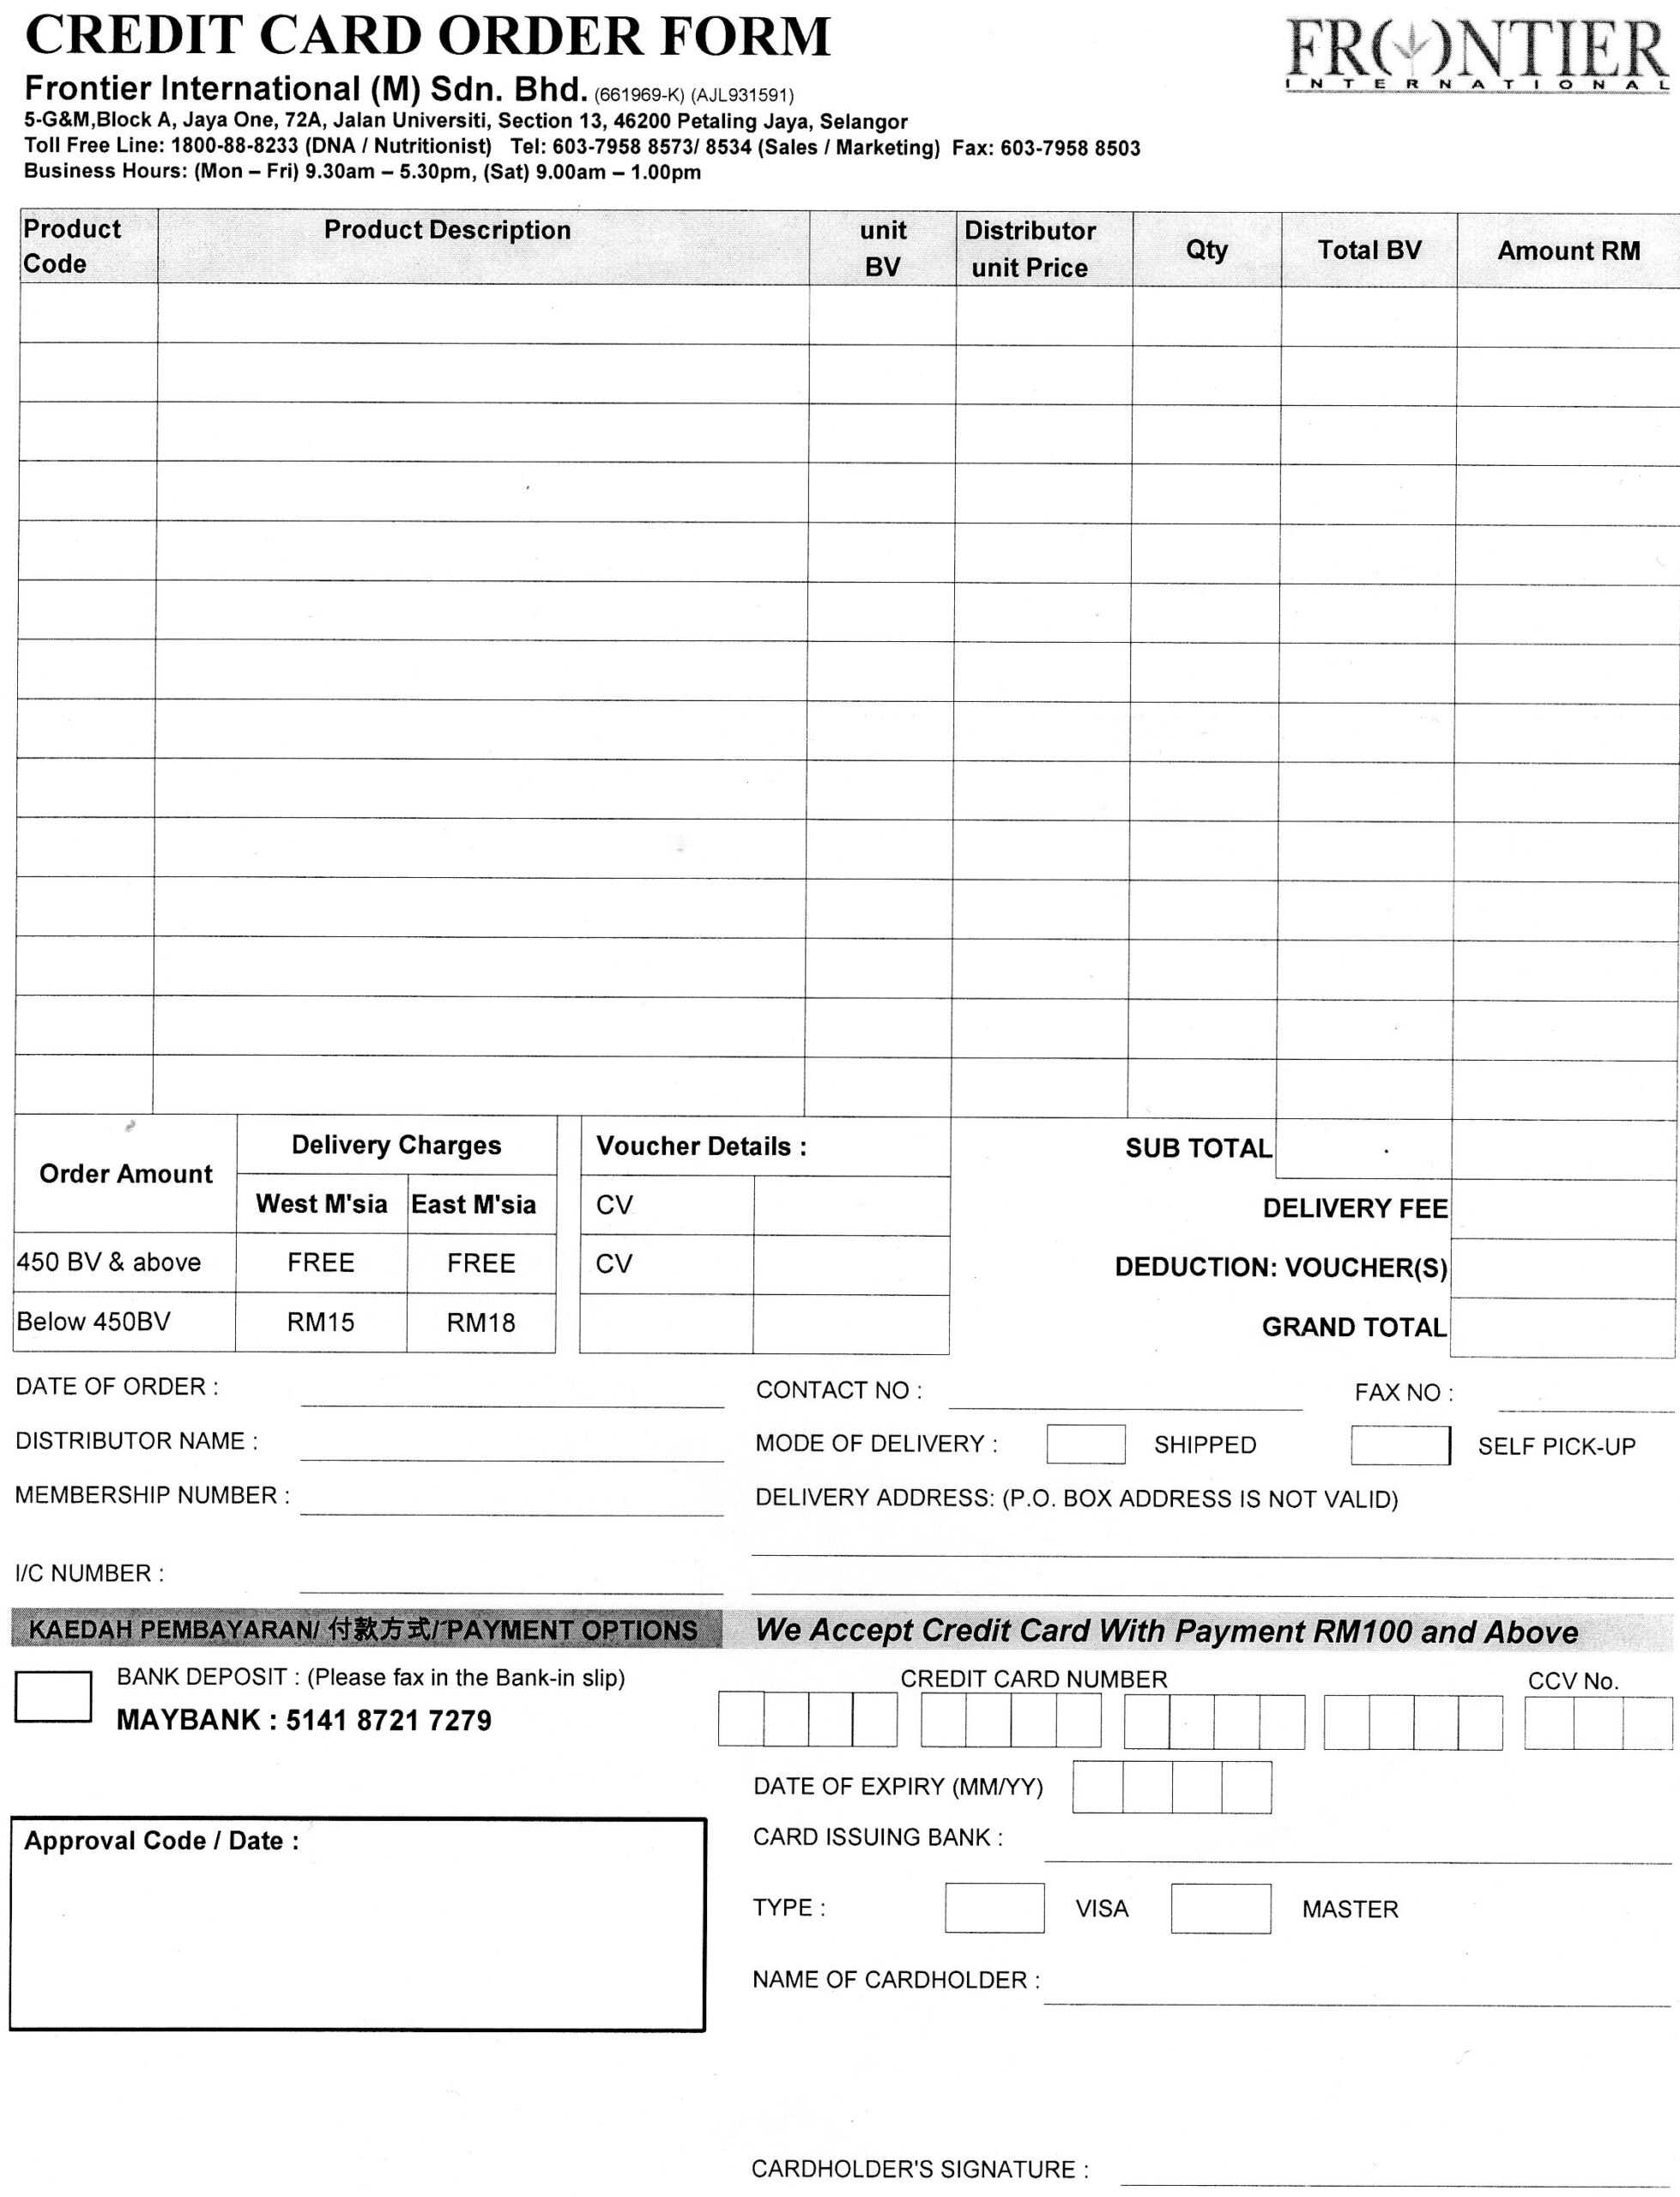 Credit Card Order Form | June Chan's Frontier Network With Regard To Order Form With Credit Card Template